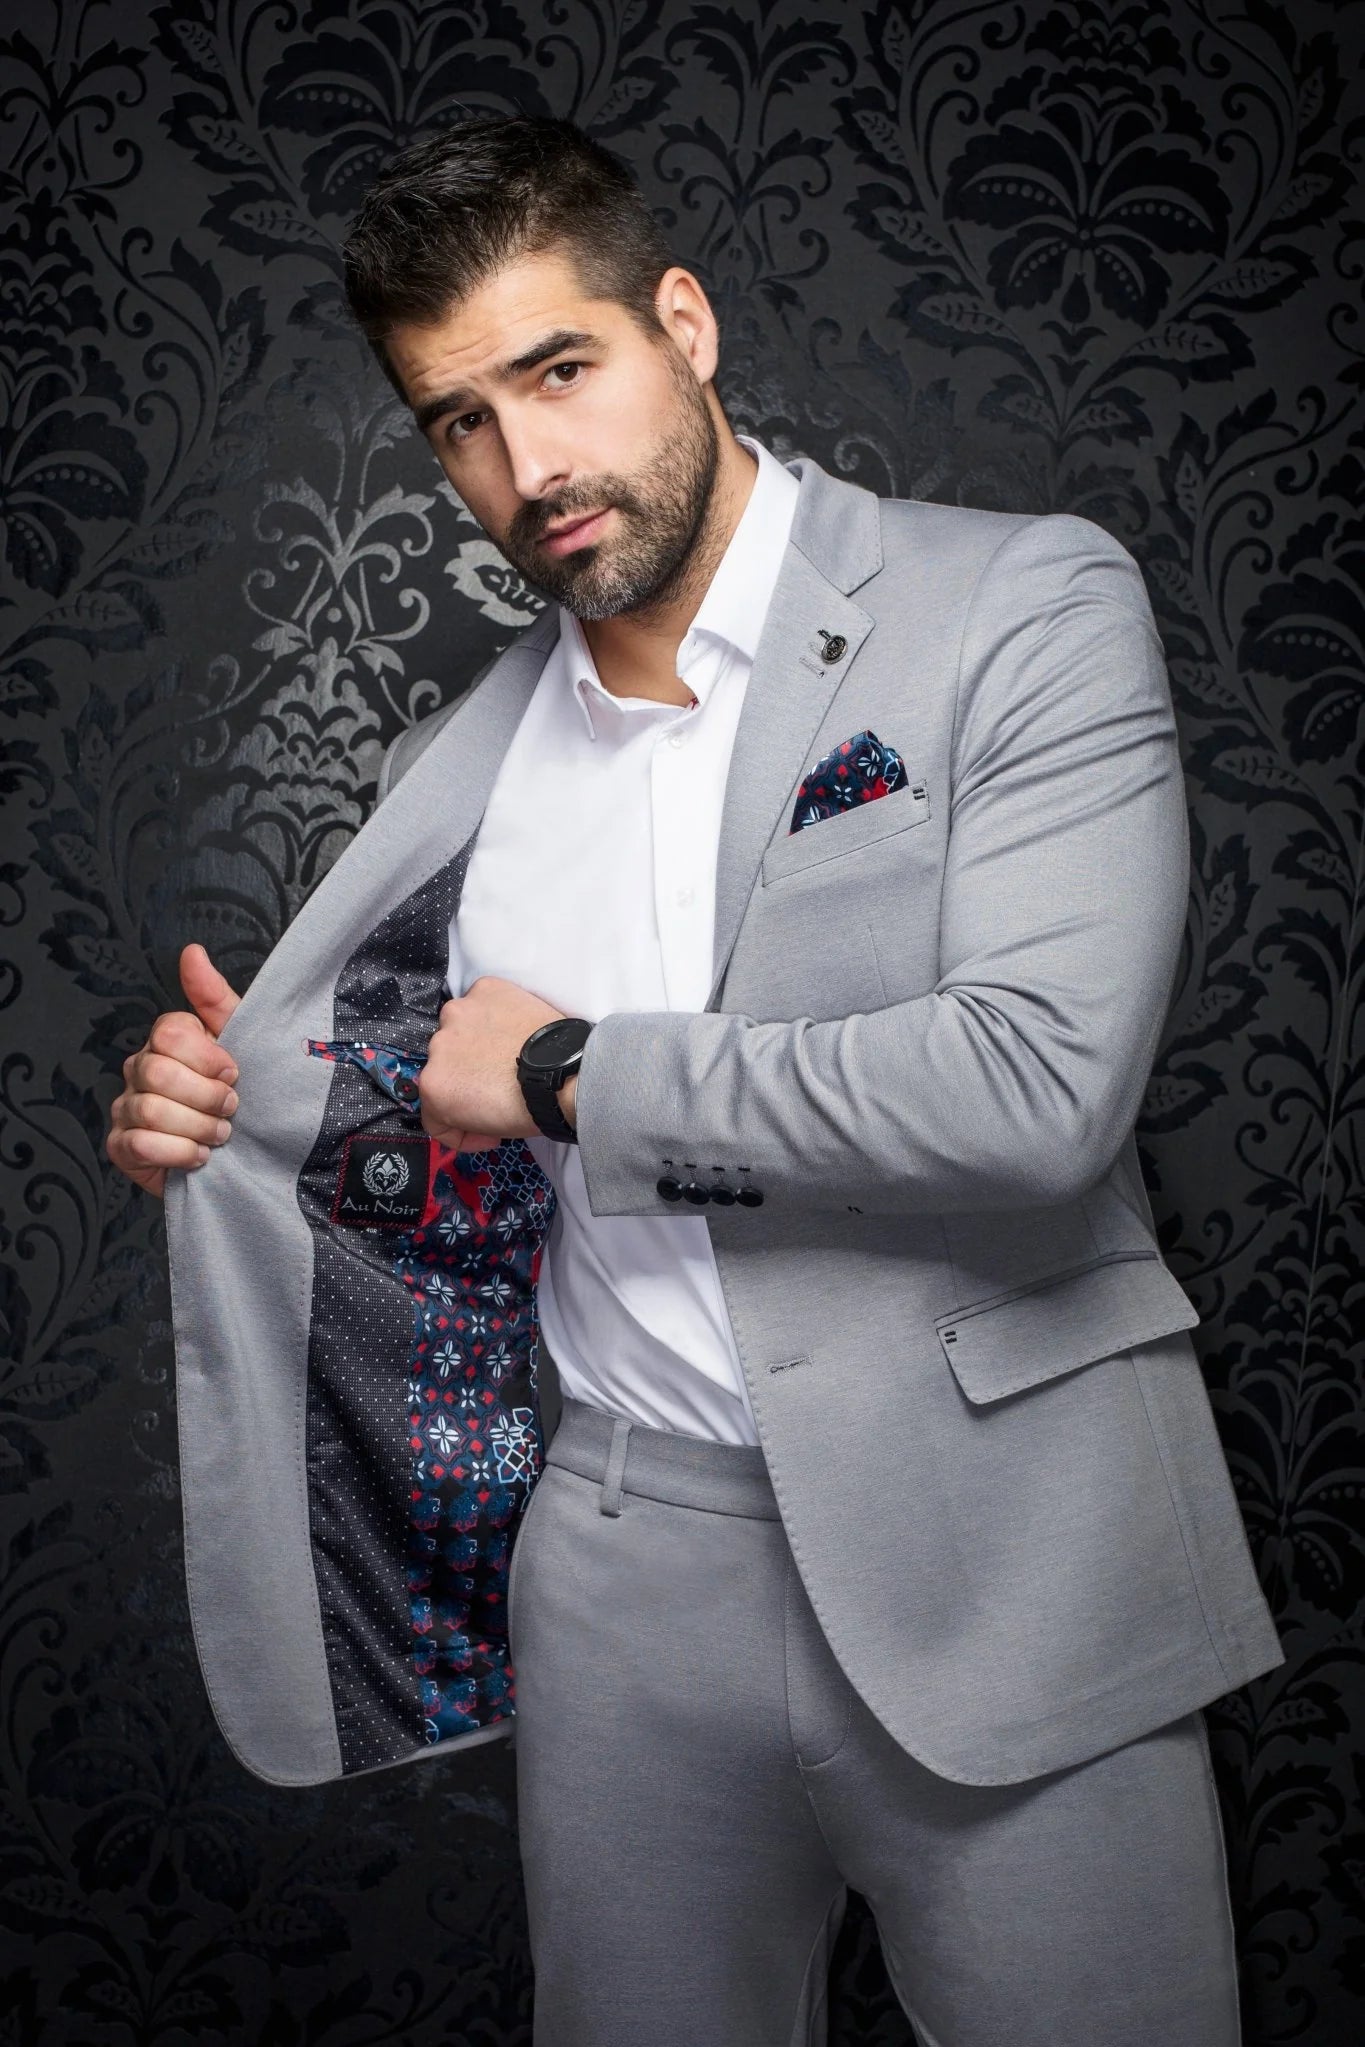 Blazer Fashionable and stretchy for men. Stand out with our sophisticated details and patterned lining. Comfortable with a premium fabric blend offering confidence and freedom of movement.